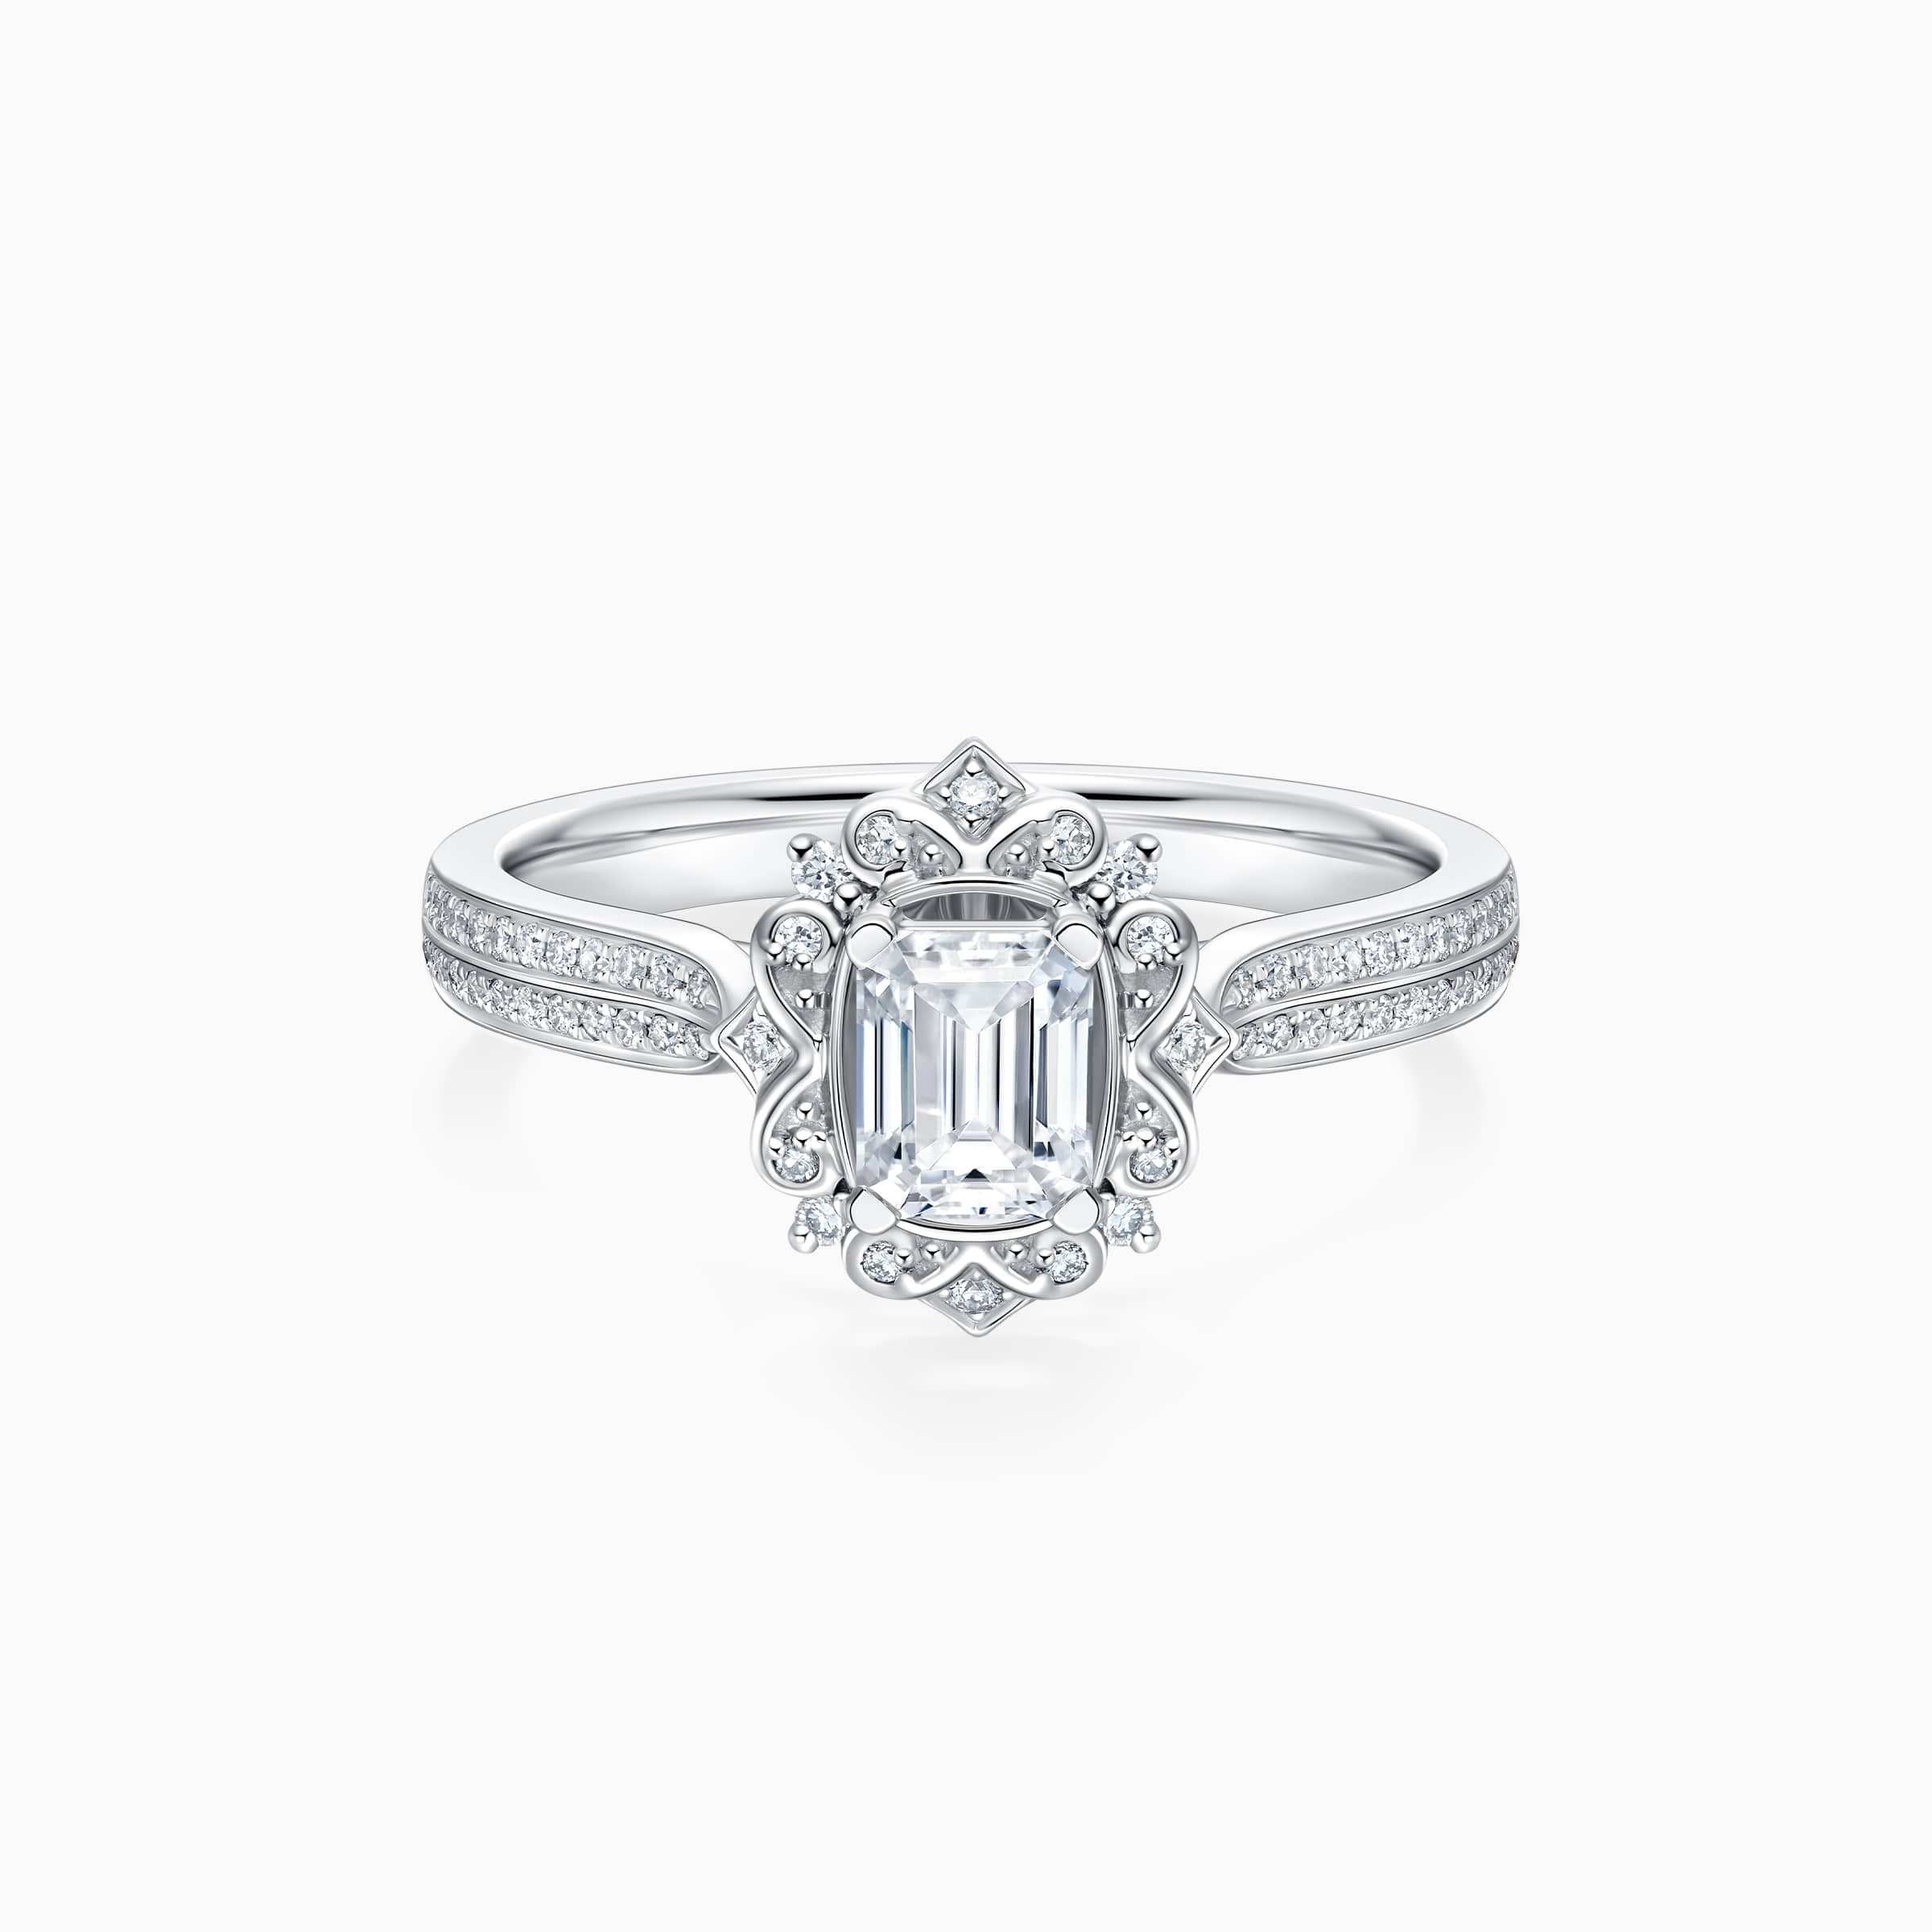 Darry Ring vintage emerald cut engagement ring in platinum